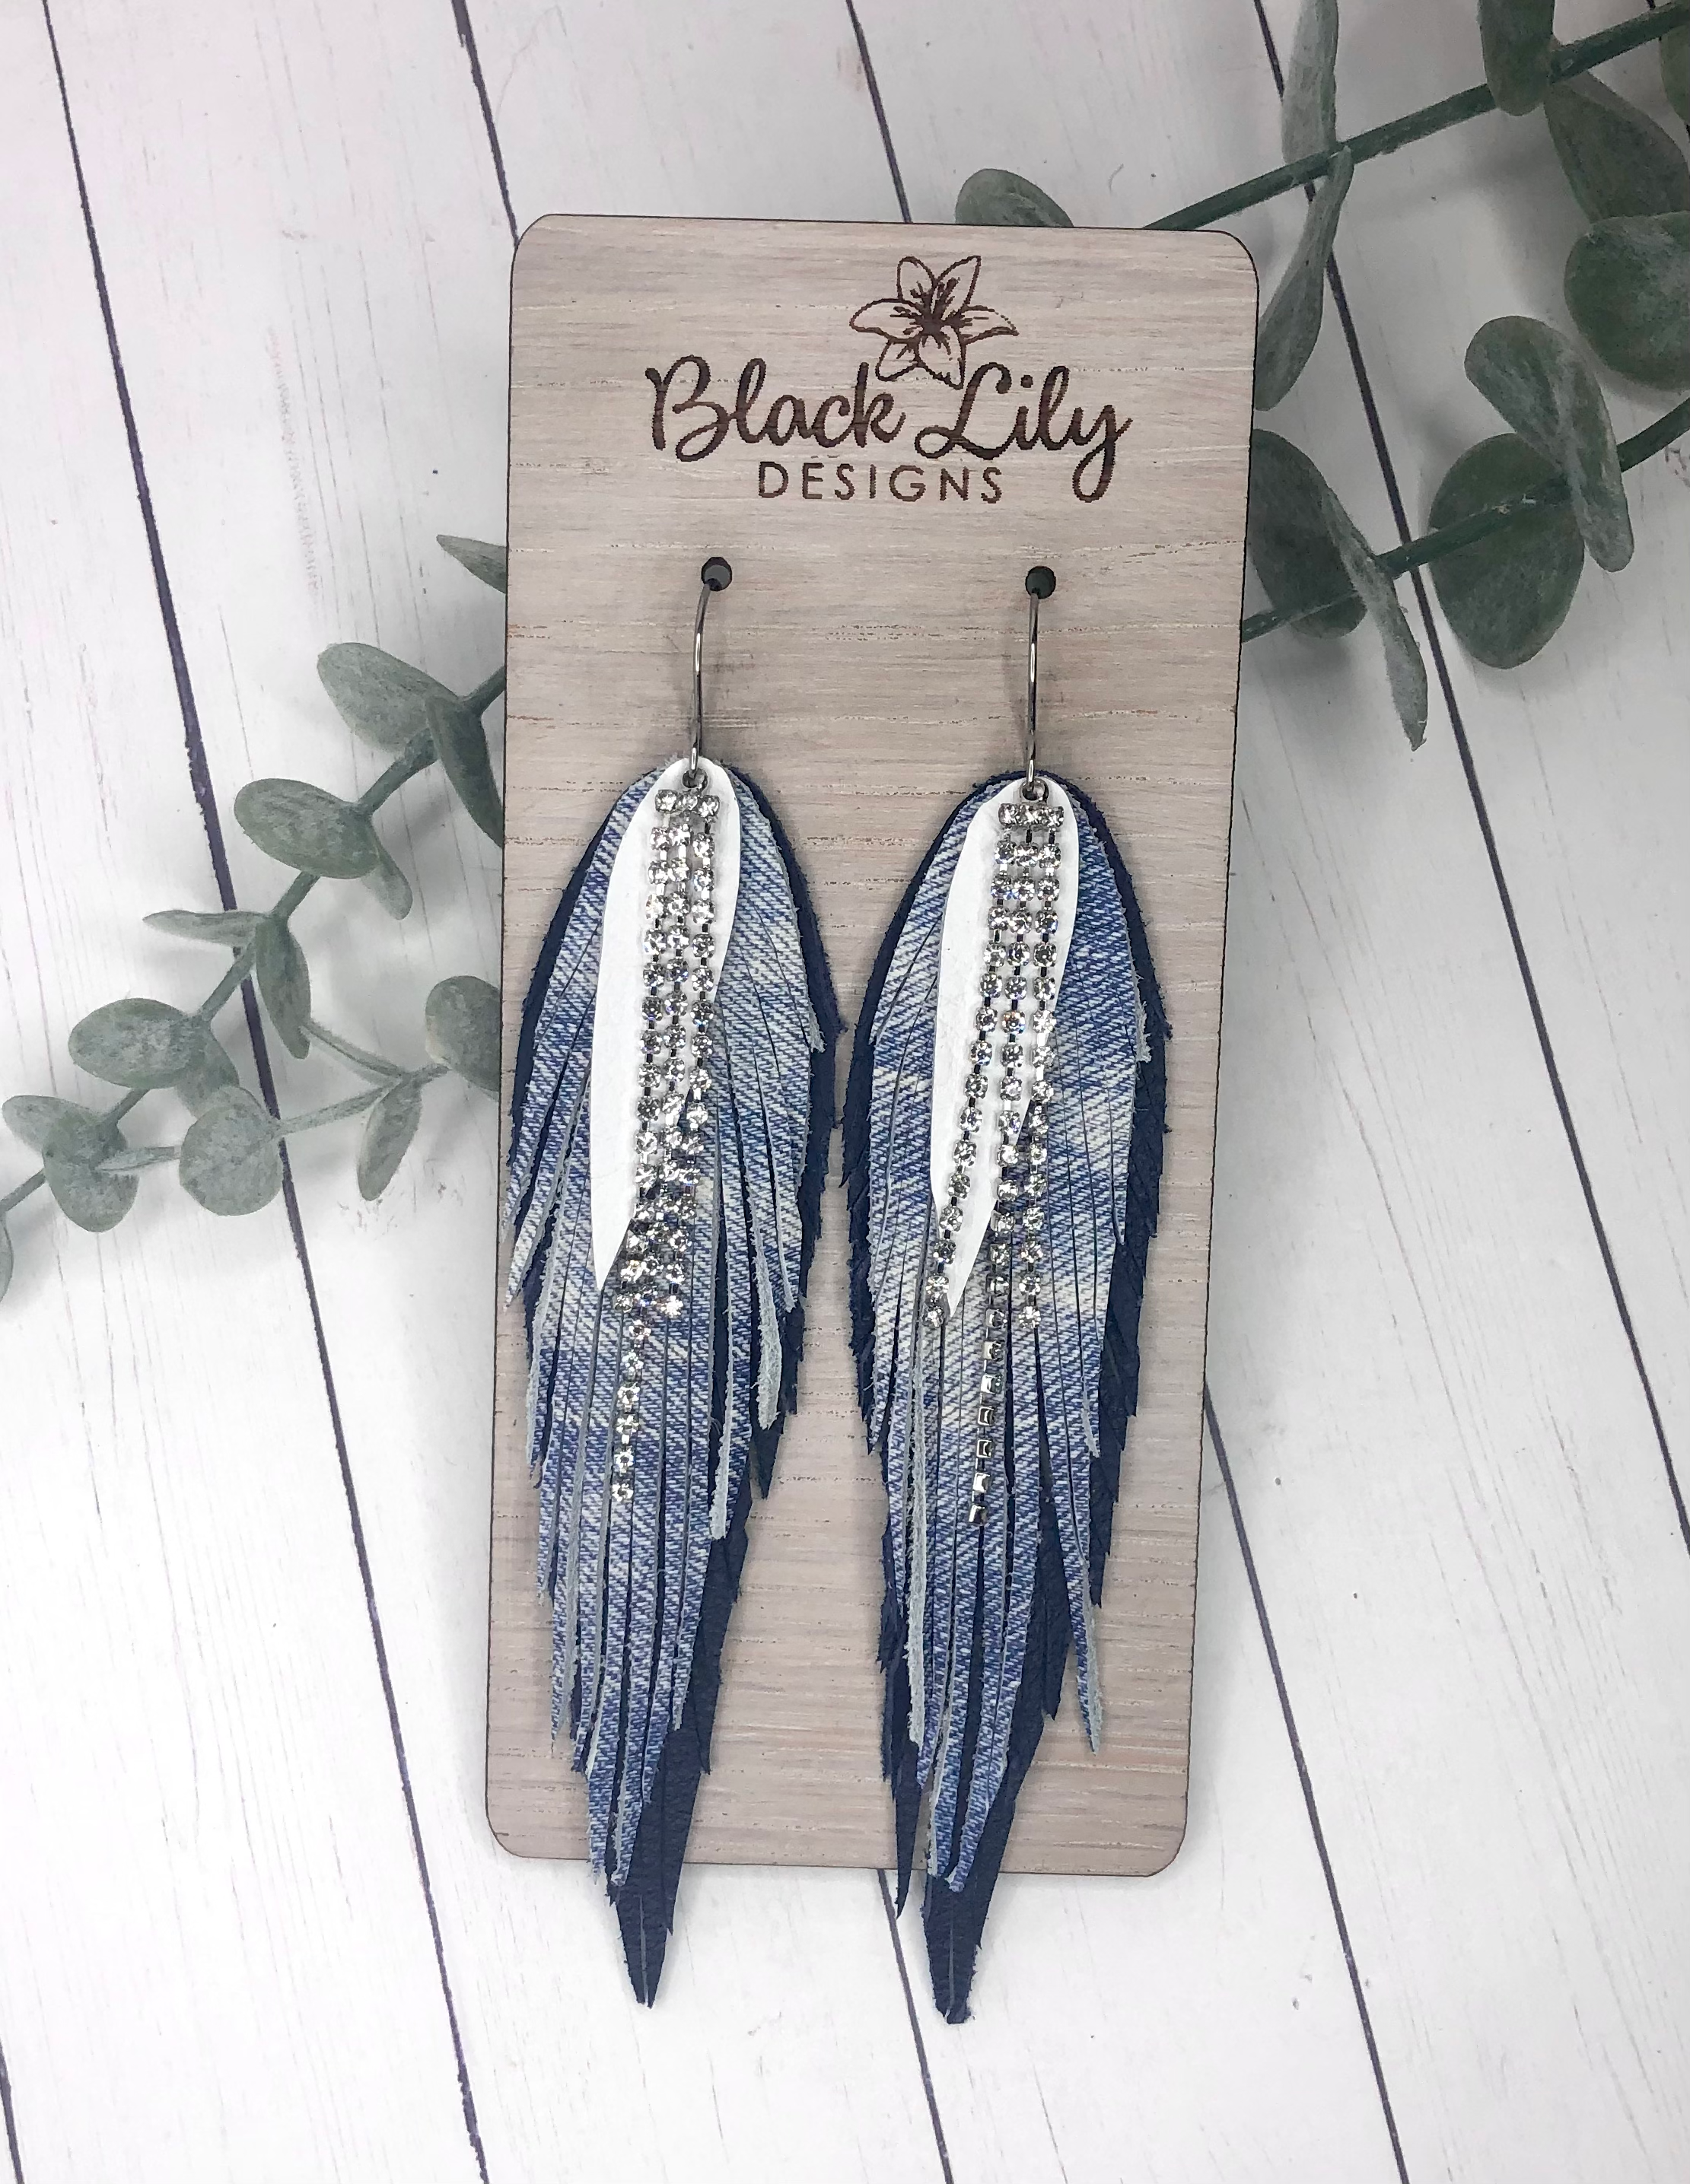 Where can I buy long feather earrings online? - Quora